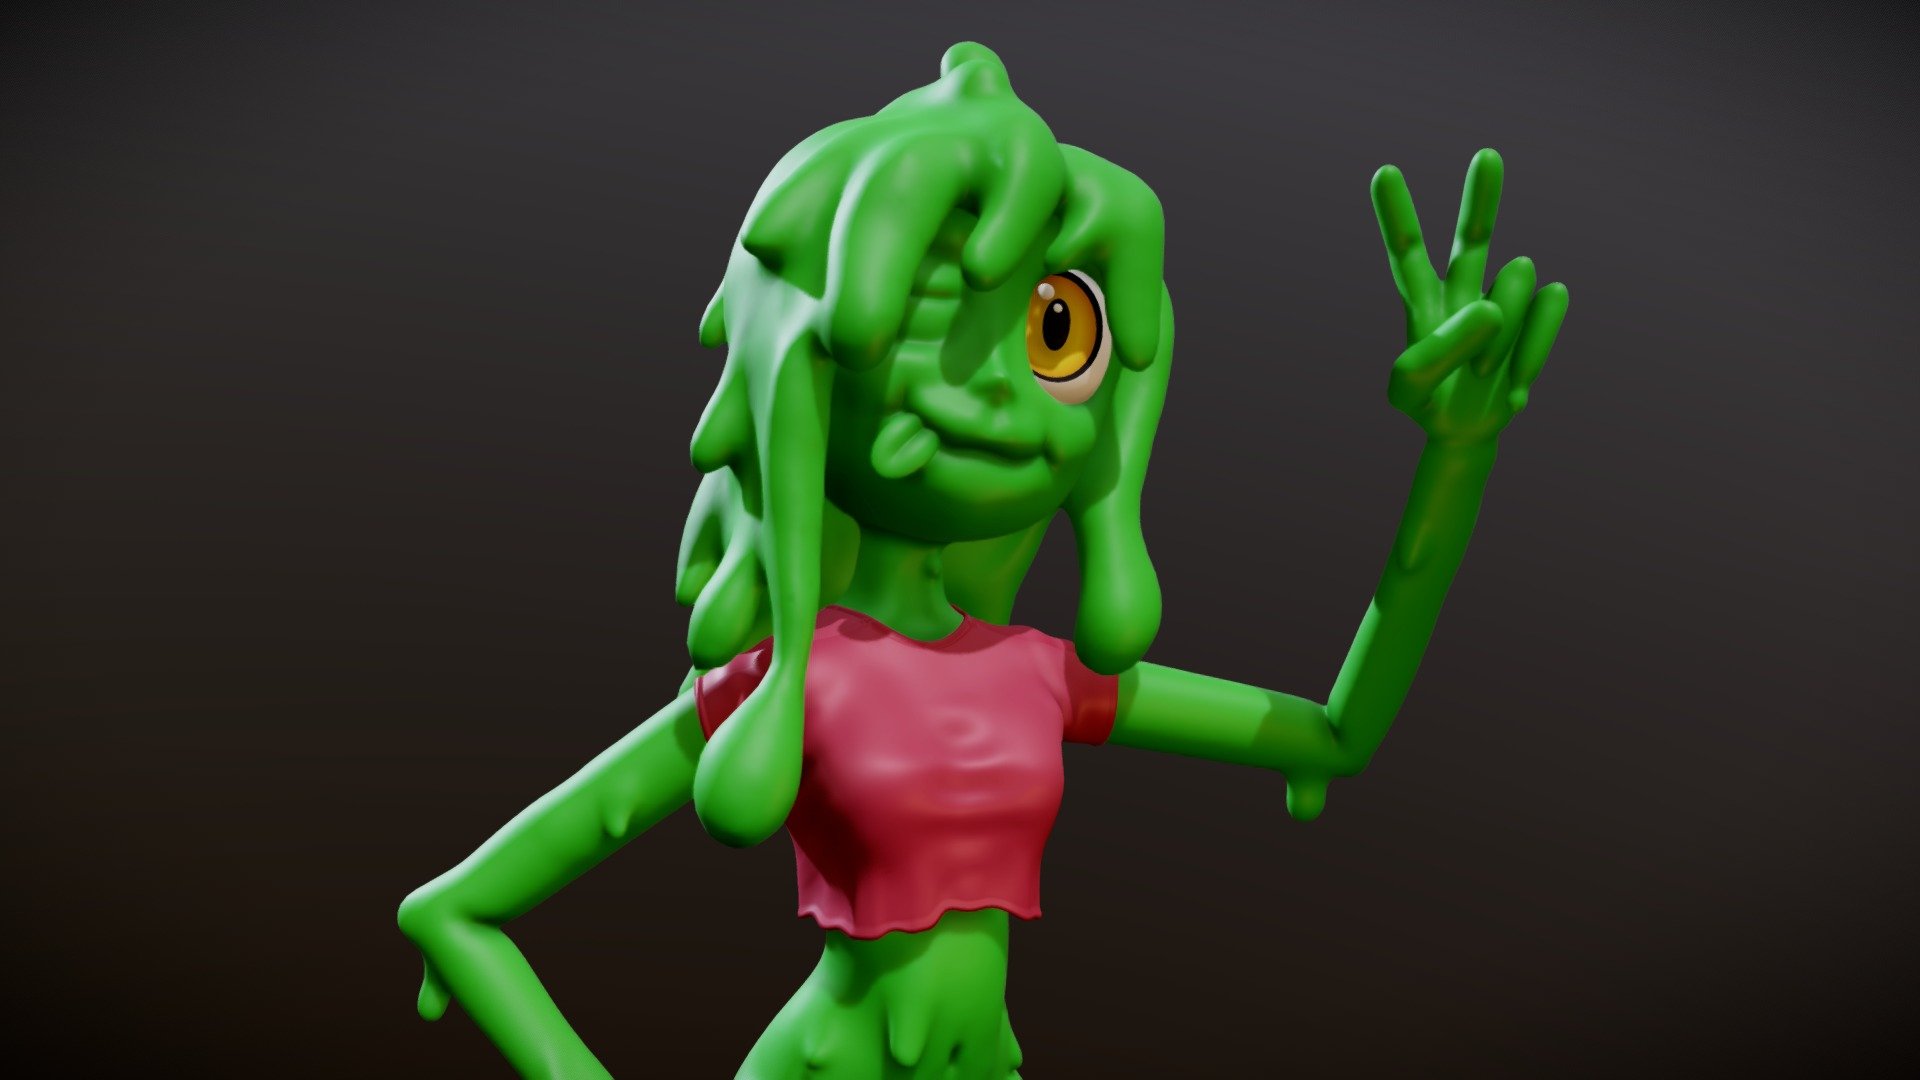 Sculpt January day 8 - Liquid.

Just a happy slime girl :) - Slime Girl - SJ day 8 - Download Free 3D model by Lillya 3d model